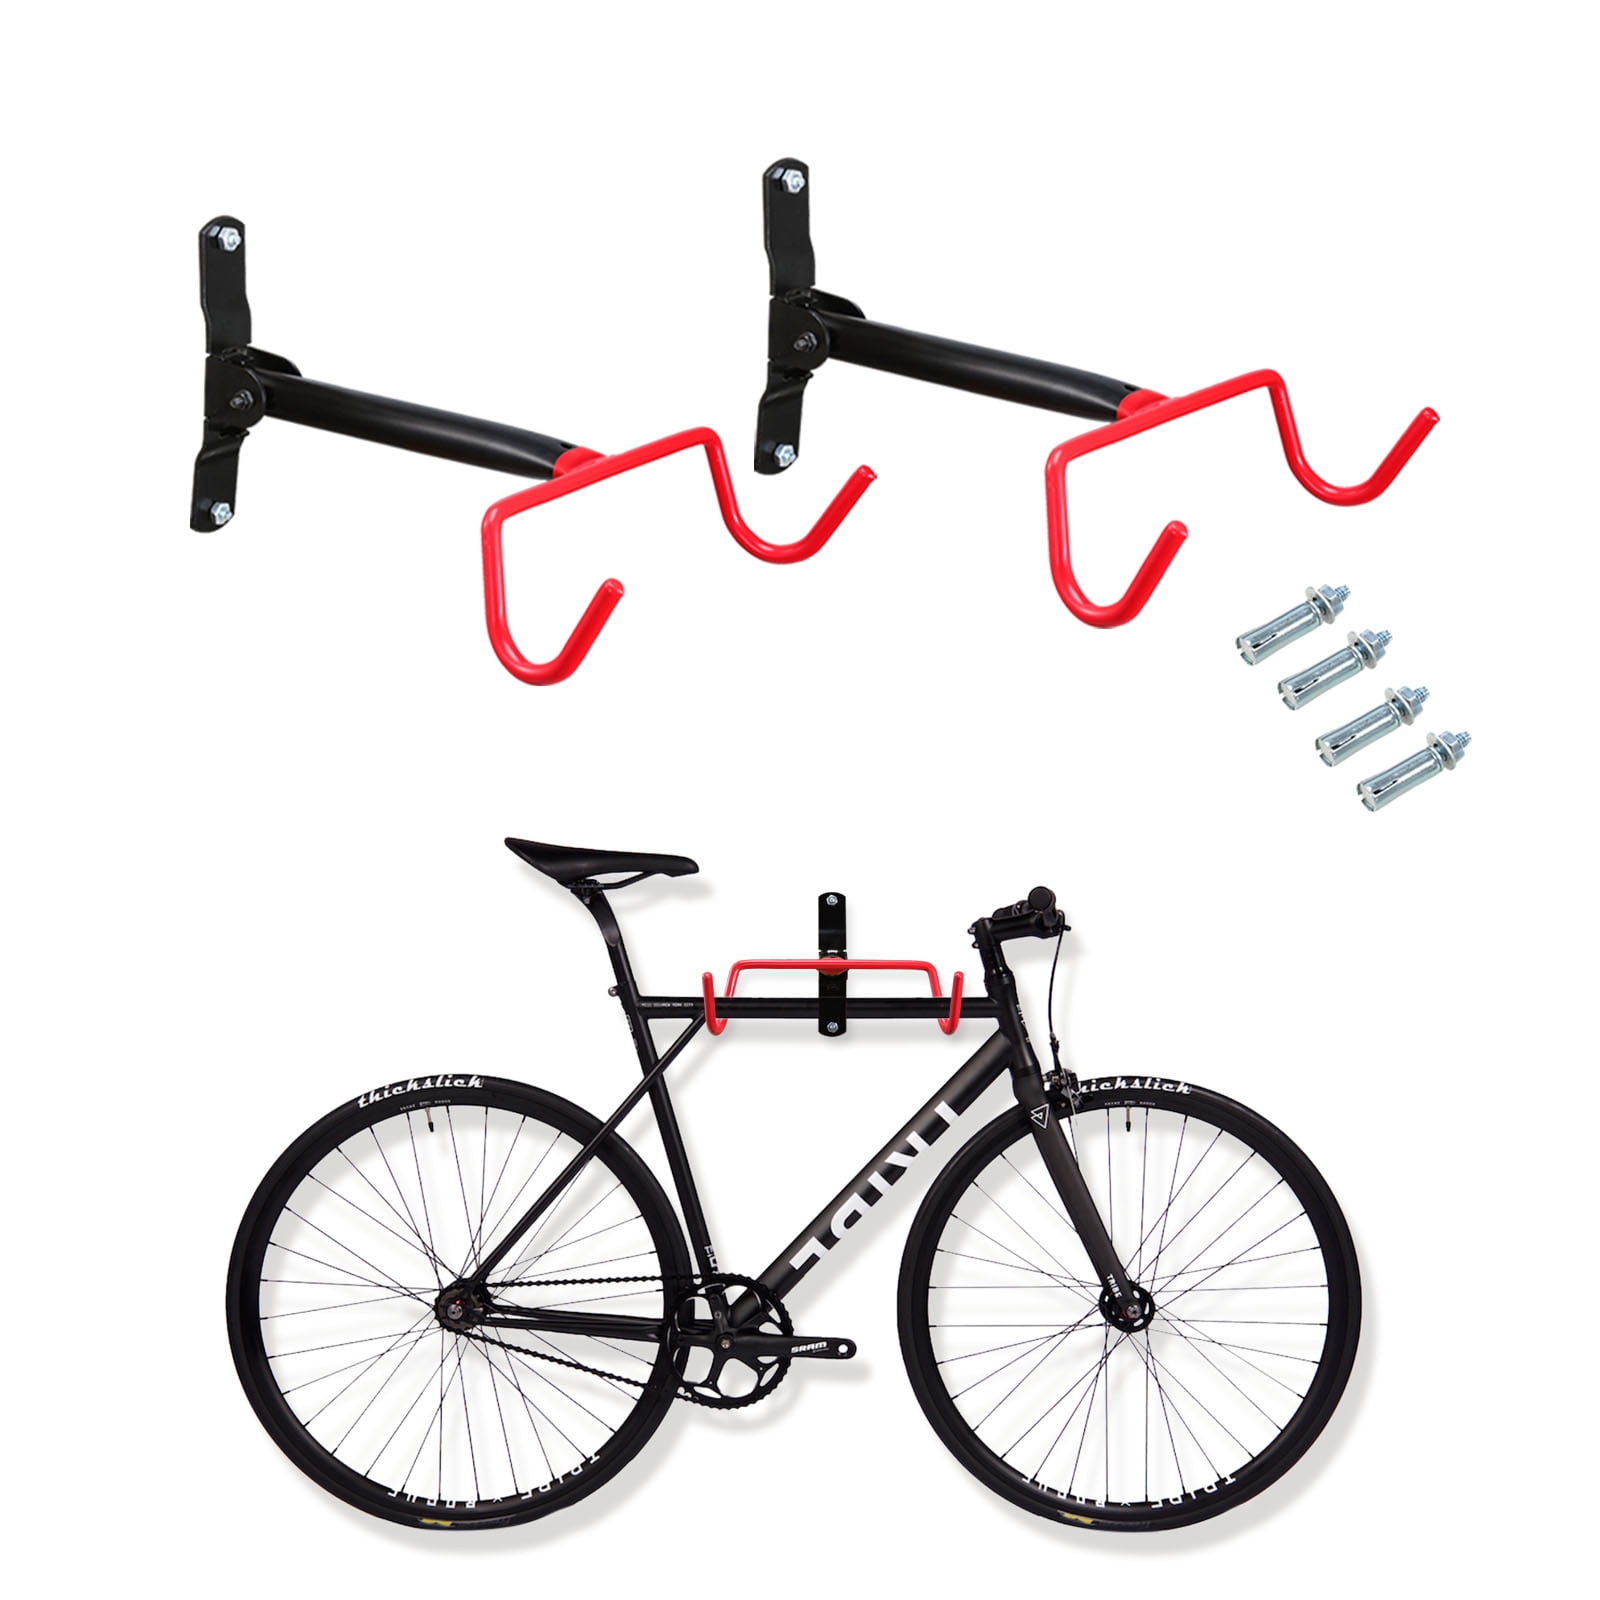 Bike Bicycle Storage Rack for Garage and Shed Pack 1 to 5 Metal Bike Bicycle Hooks Holder with All Needed Accessories FANATU Bike Hanger Wall Mount 